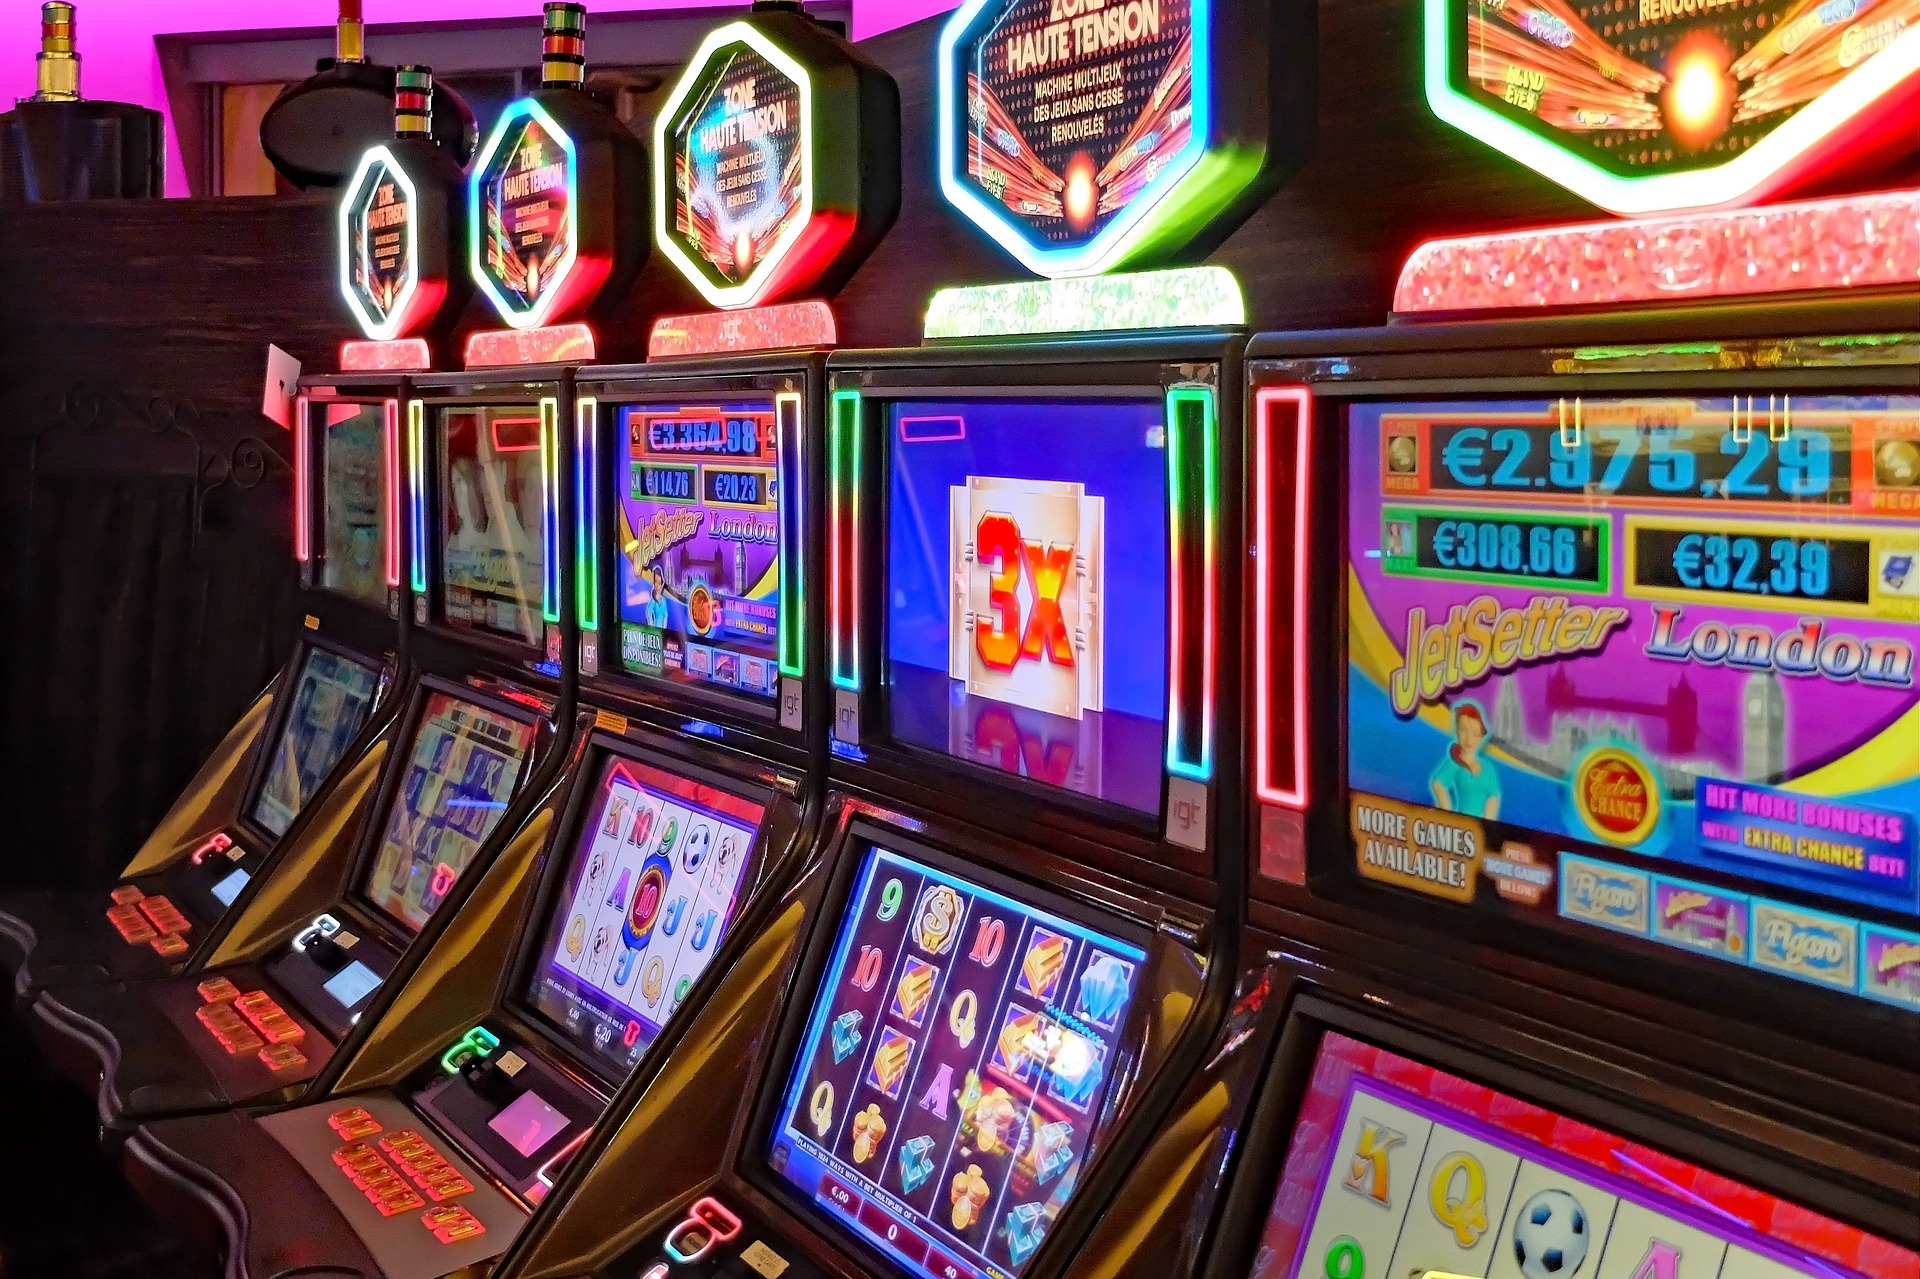 Are You non gamstop casino The Right Way? These 5 Tips Will Help You Answer